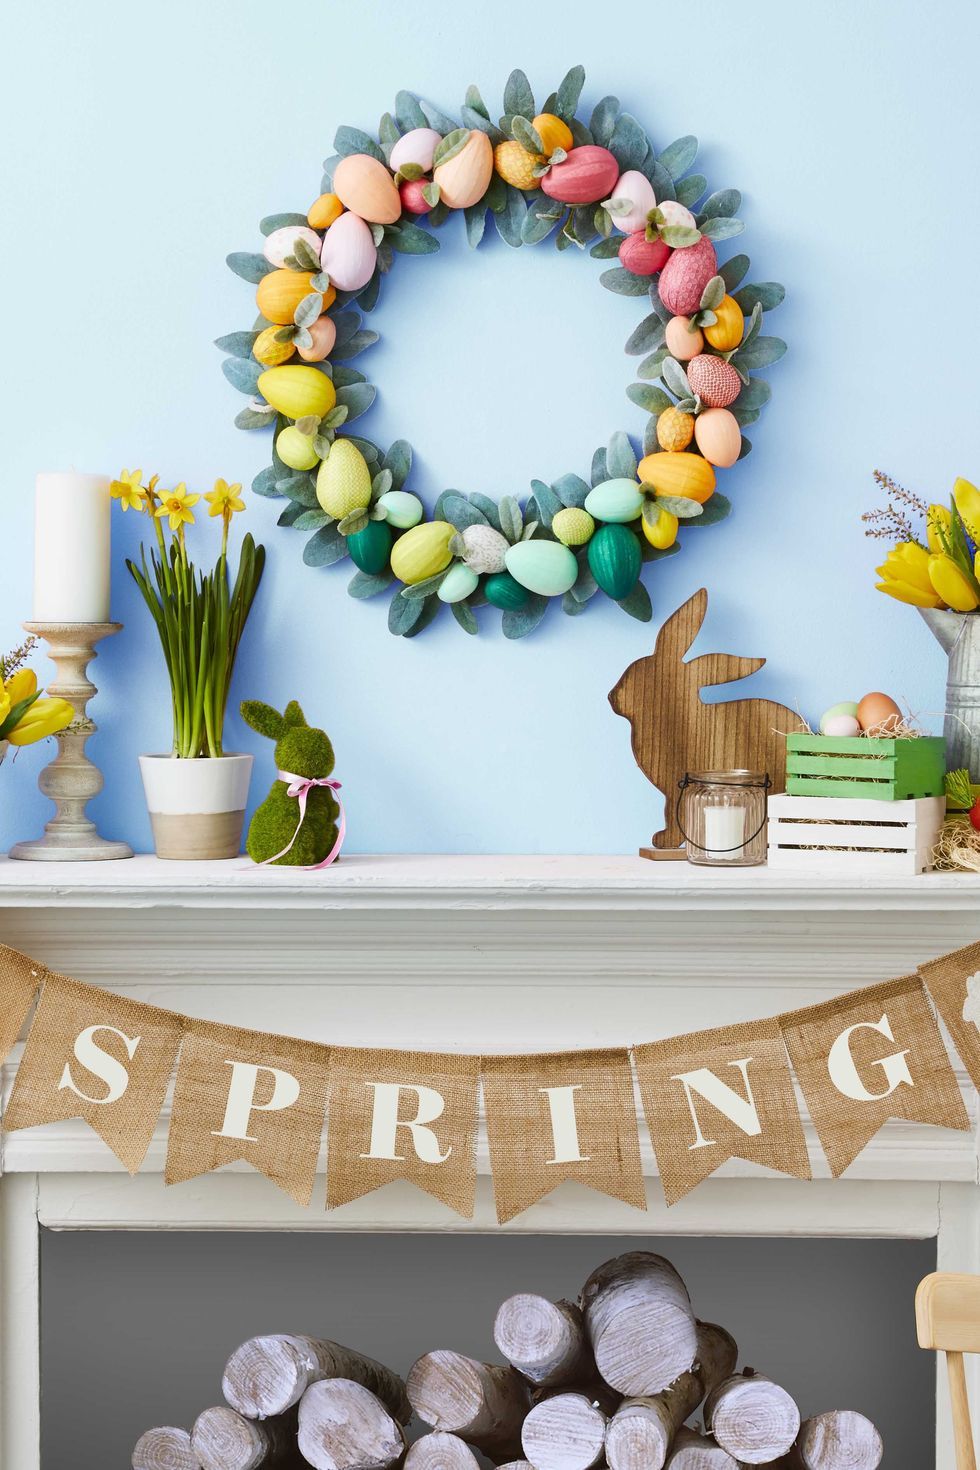 9+ Easter Crafts for Adults (Easter Decor and Gifts) – Craftivity Designs